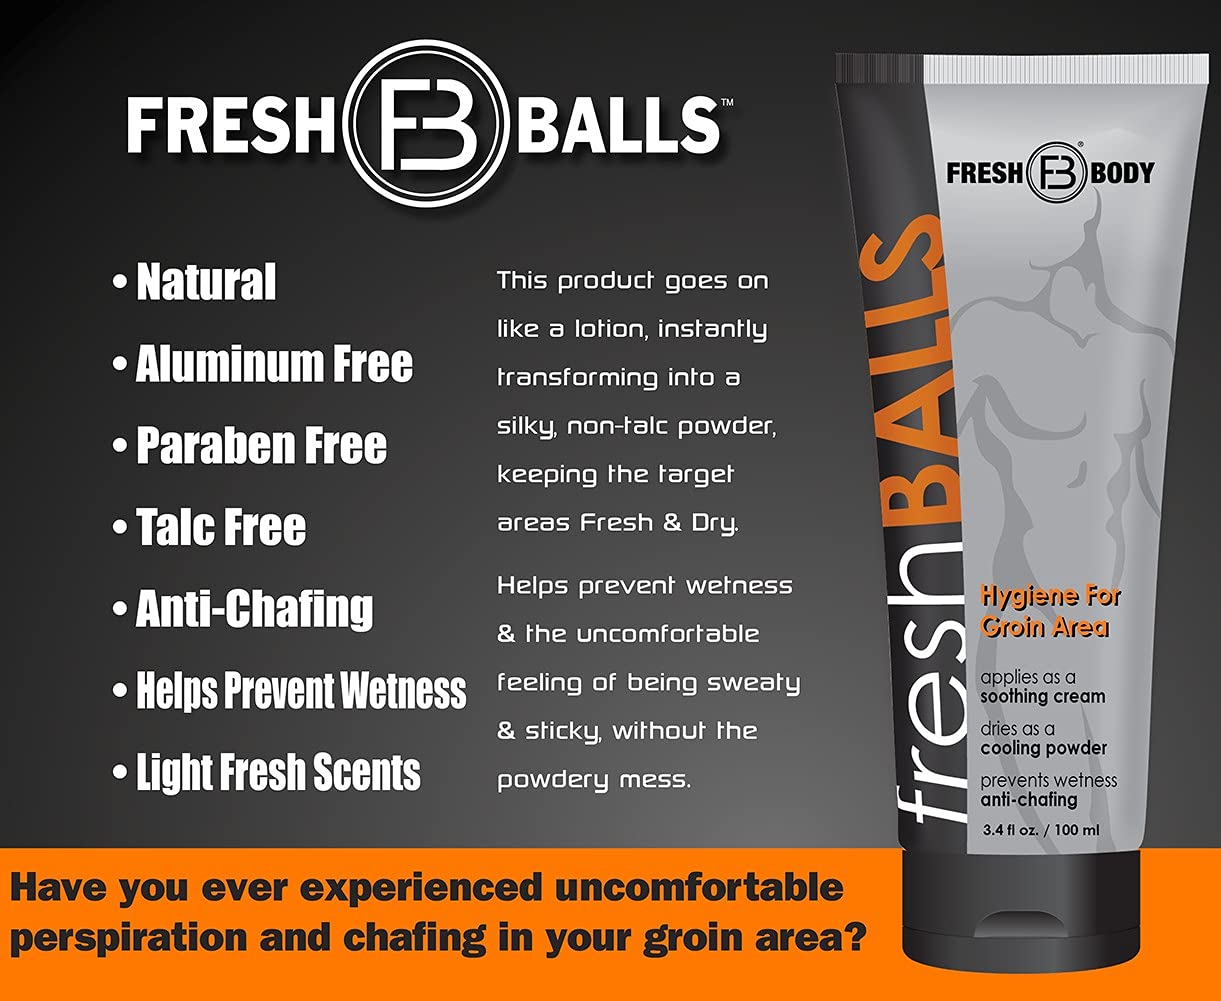 Fresh Body FB Fresh Balls On-The-Go Anti Chafing Lotion, 0.07 Fl Oz Travel Size Packet (30 Pack) - Ball Deodorant for Men and Soothing Chafing Cream to Powder Hygiene for Groin Area : Beauty & Personal Care